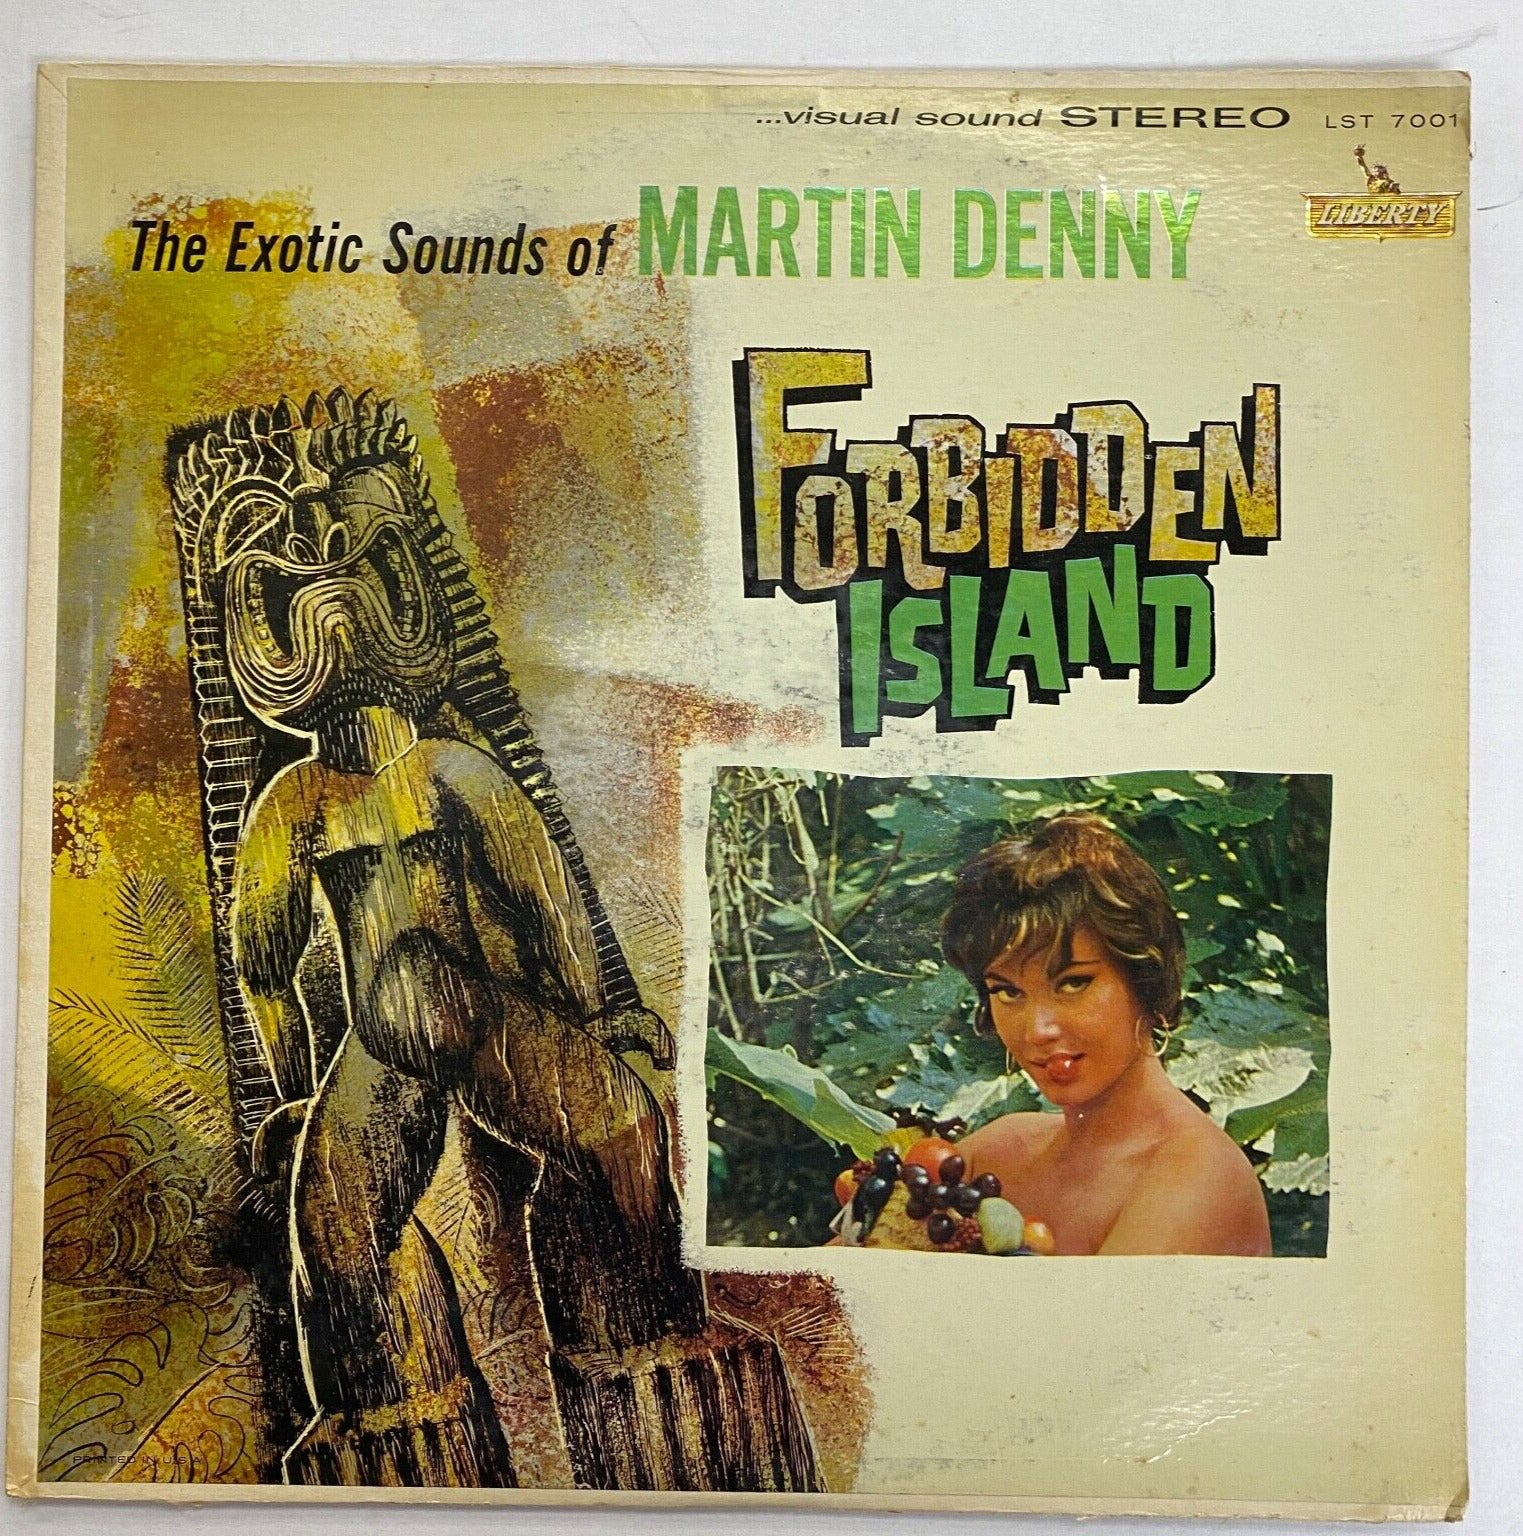 The Exotic Sounds of Martin Deny Forbidden Island LP